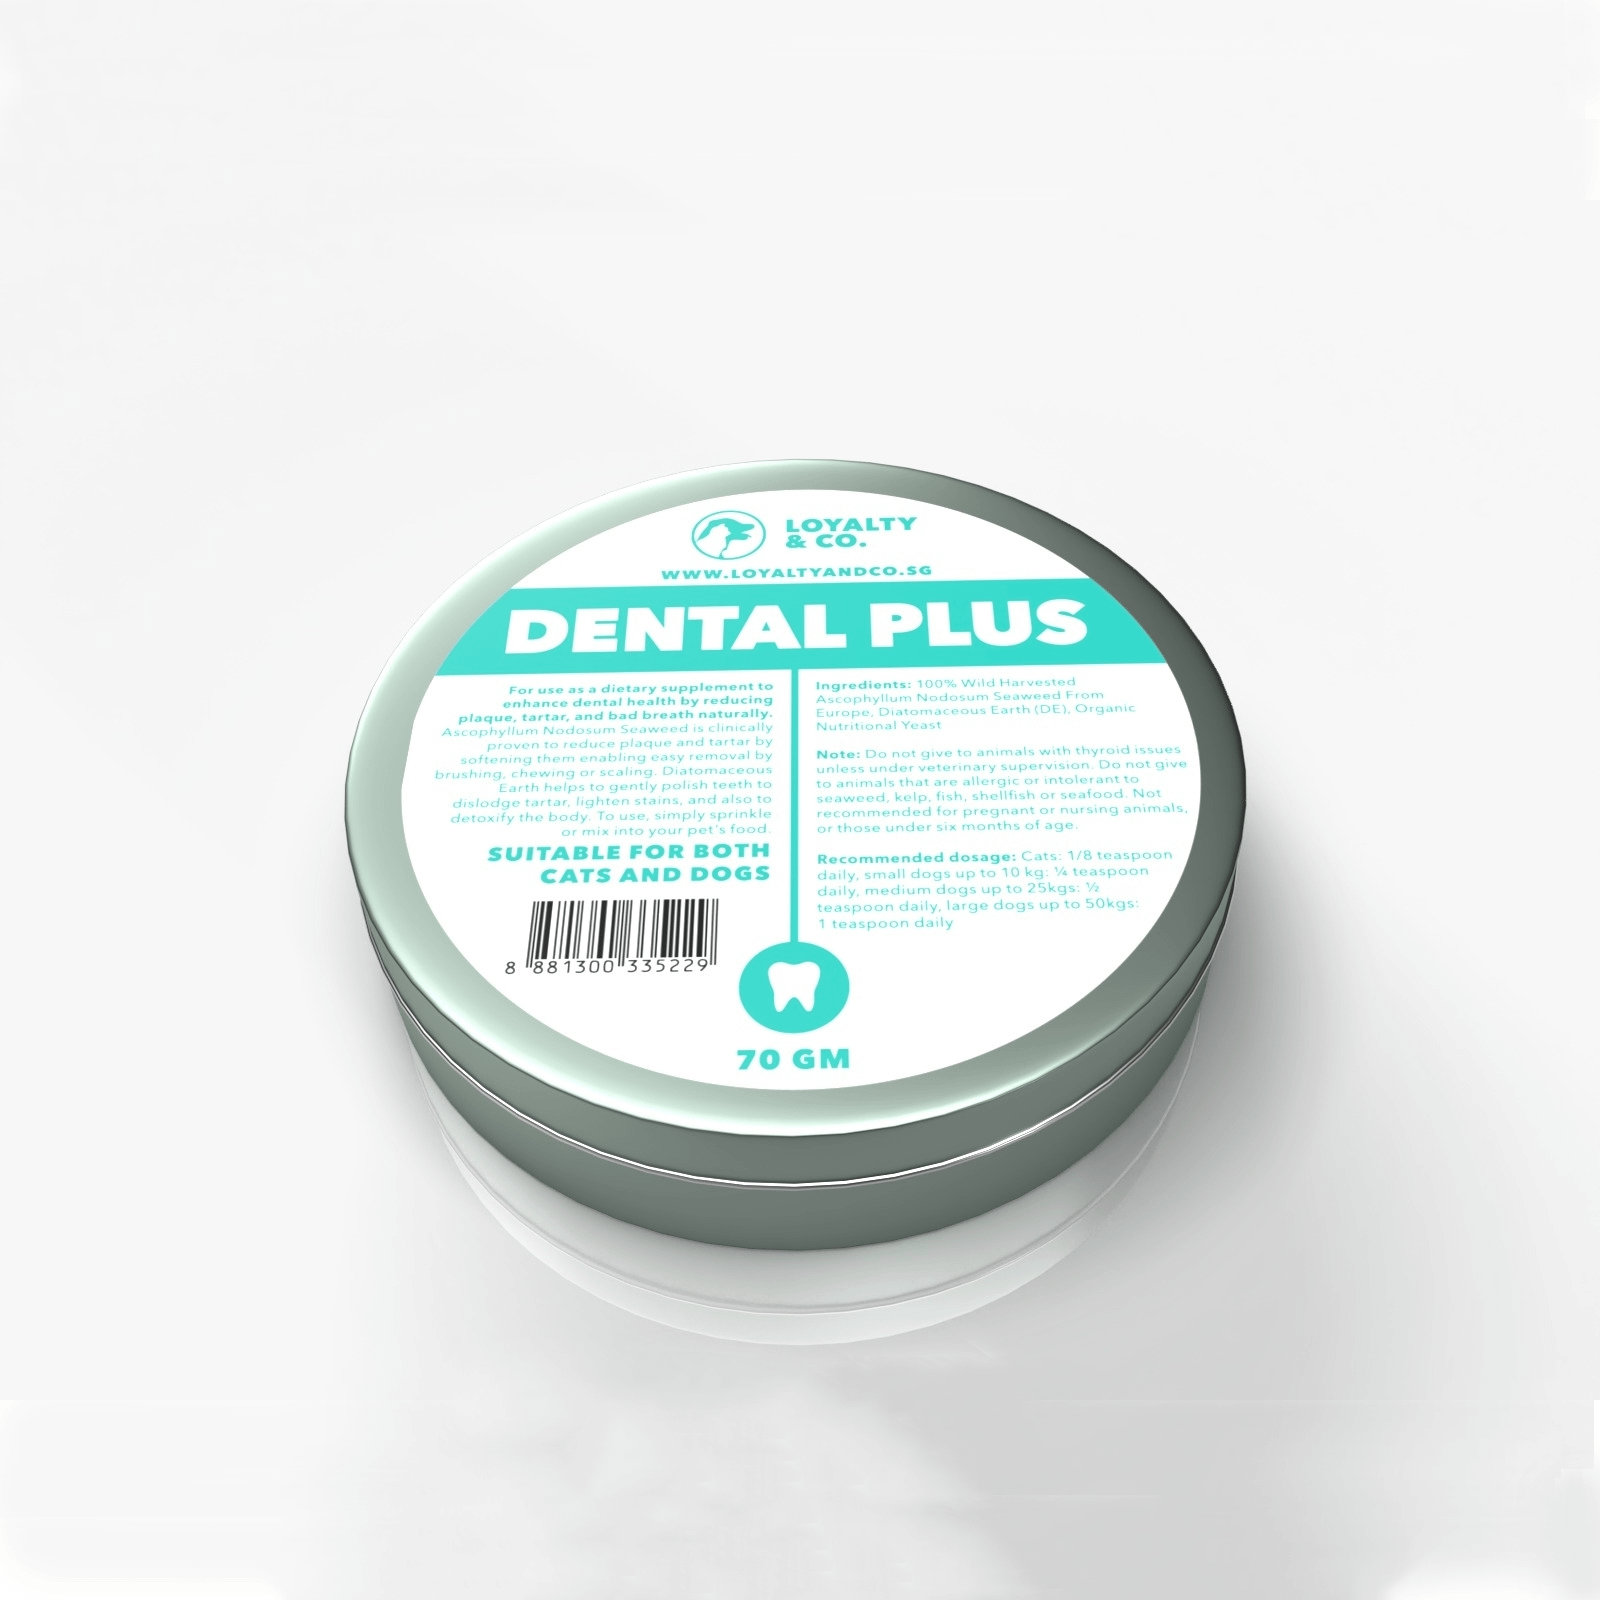 LOYALTY & CO. Dental Plus For Cats & Dogs